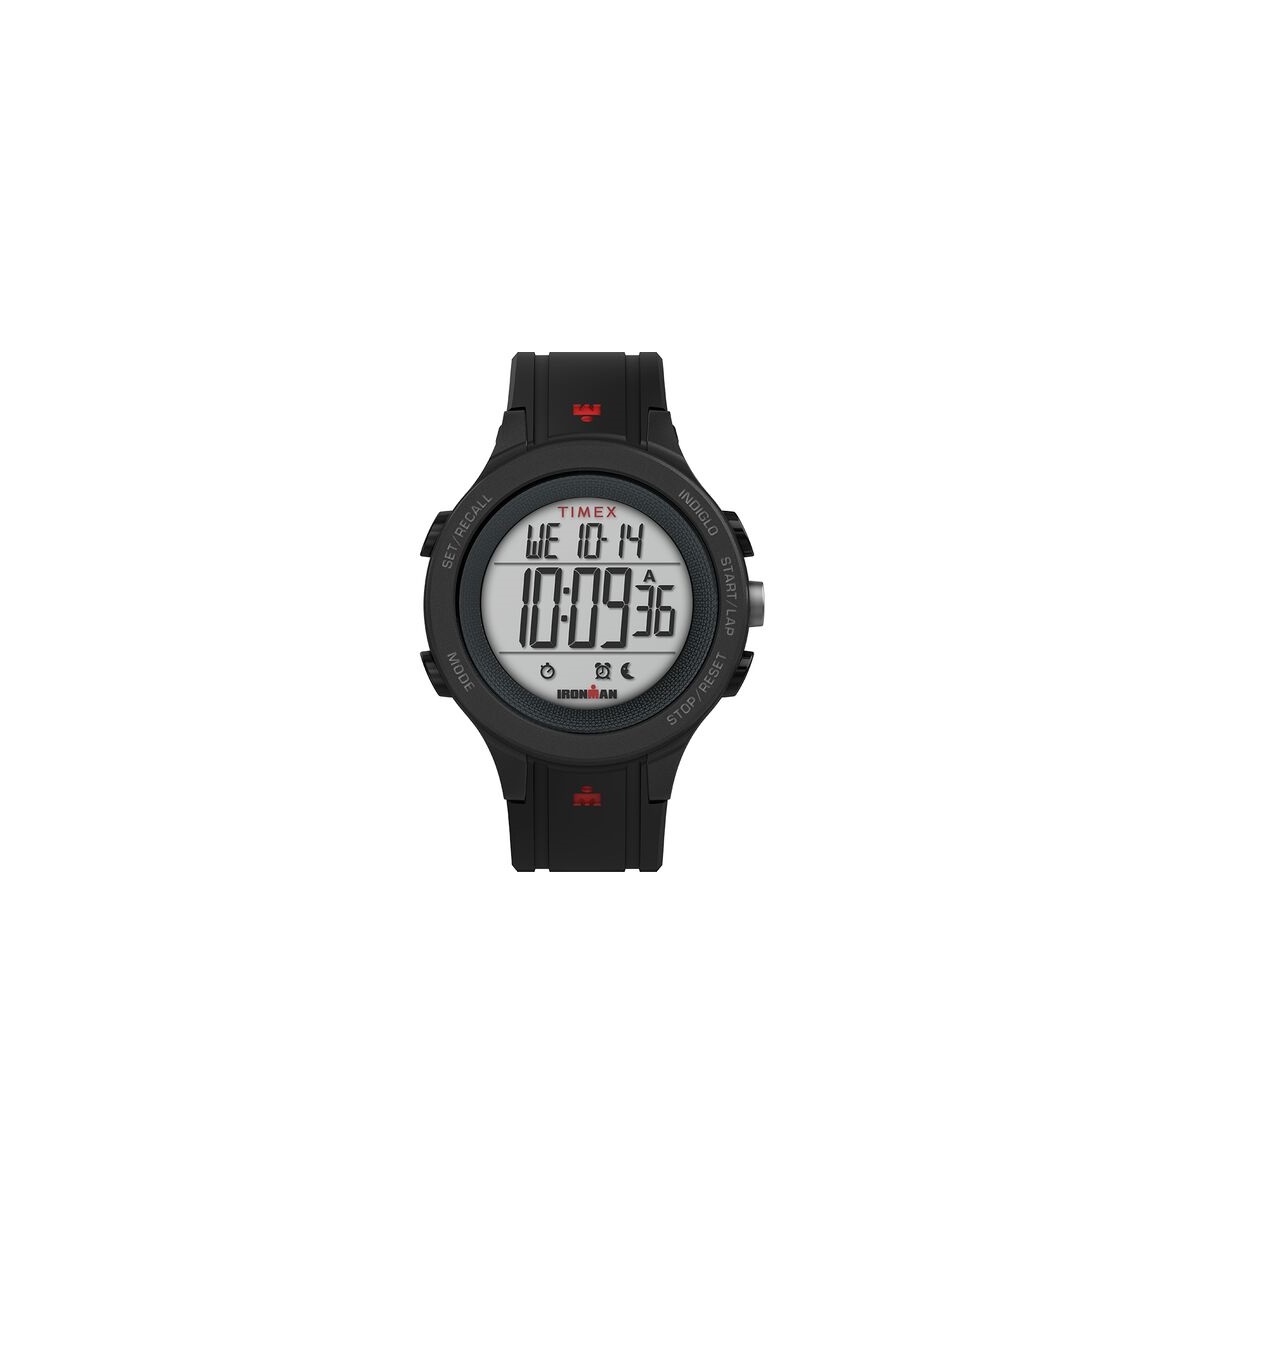 TIMEX T200 Silicone Strap Watch User Guide